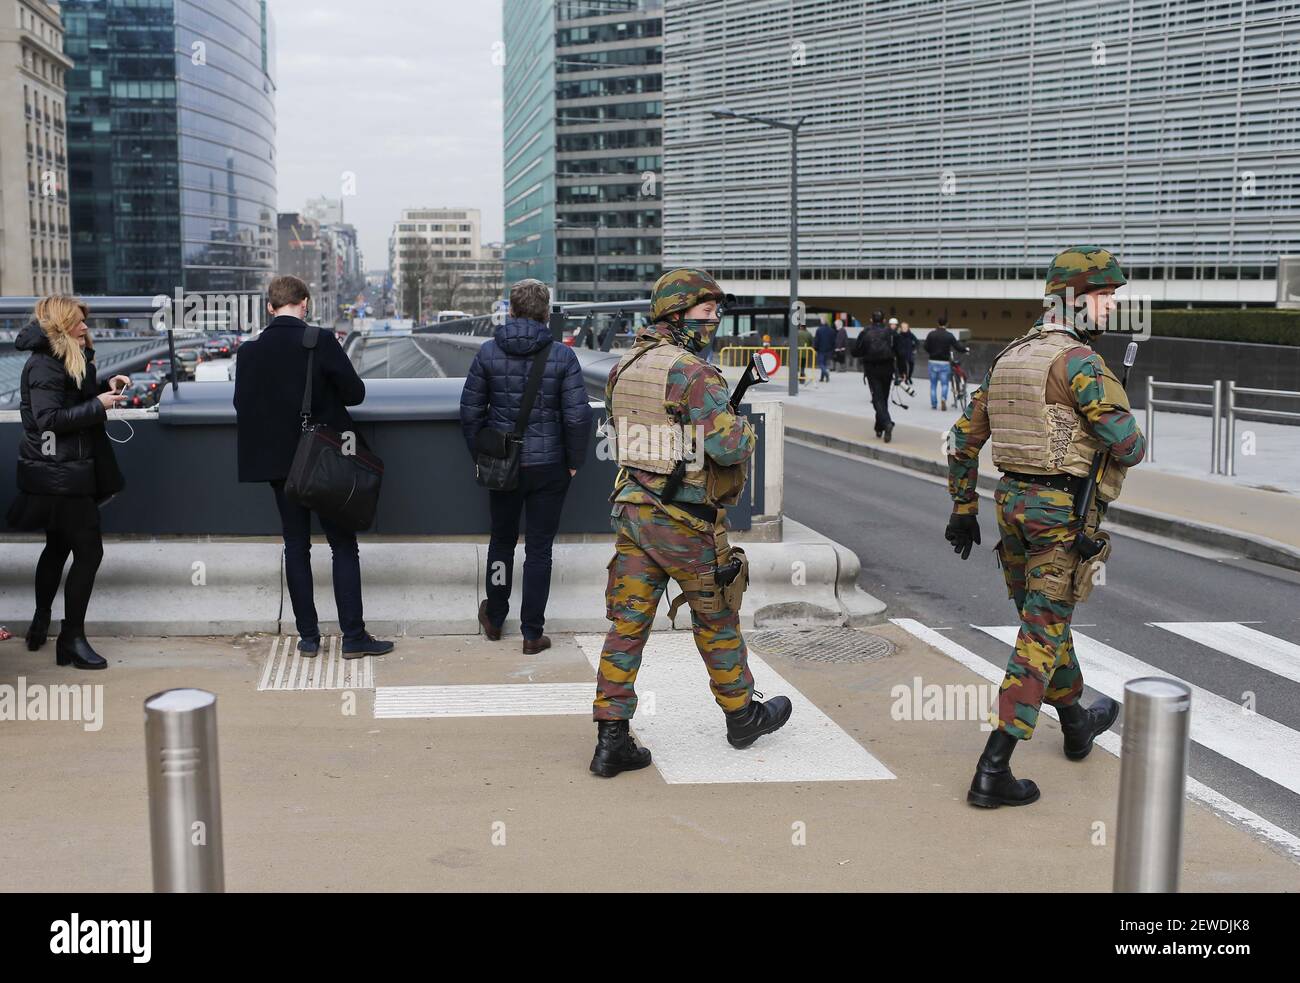 Belgian soldiers partorl outside the EU headquarters in Brussels, Belgium, on March 22, 2016. At least 13 people were reportedly dead after explosions at Brussels airport and a metro station on Tuesday.  Stock Photo